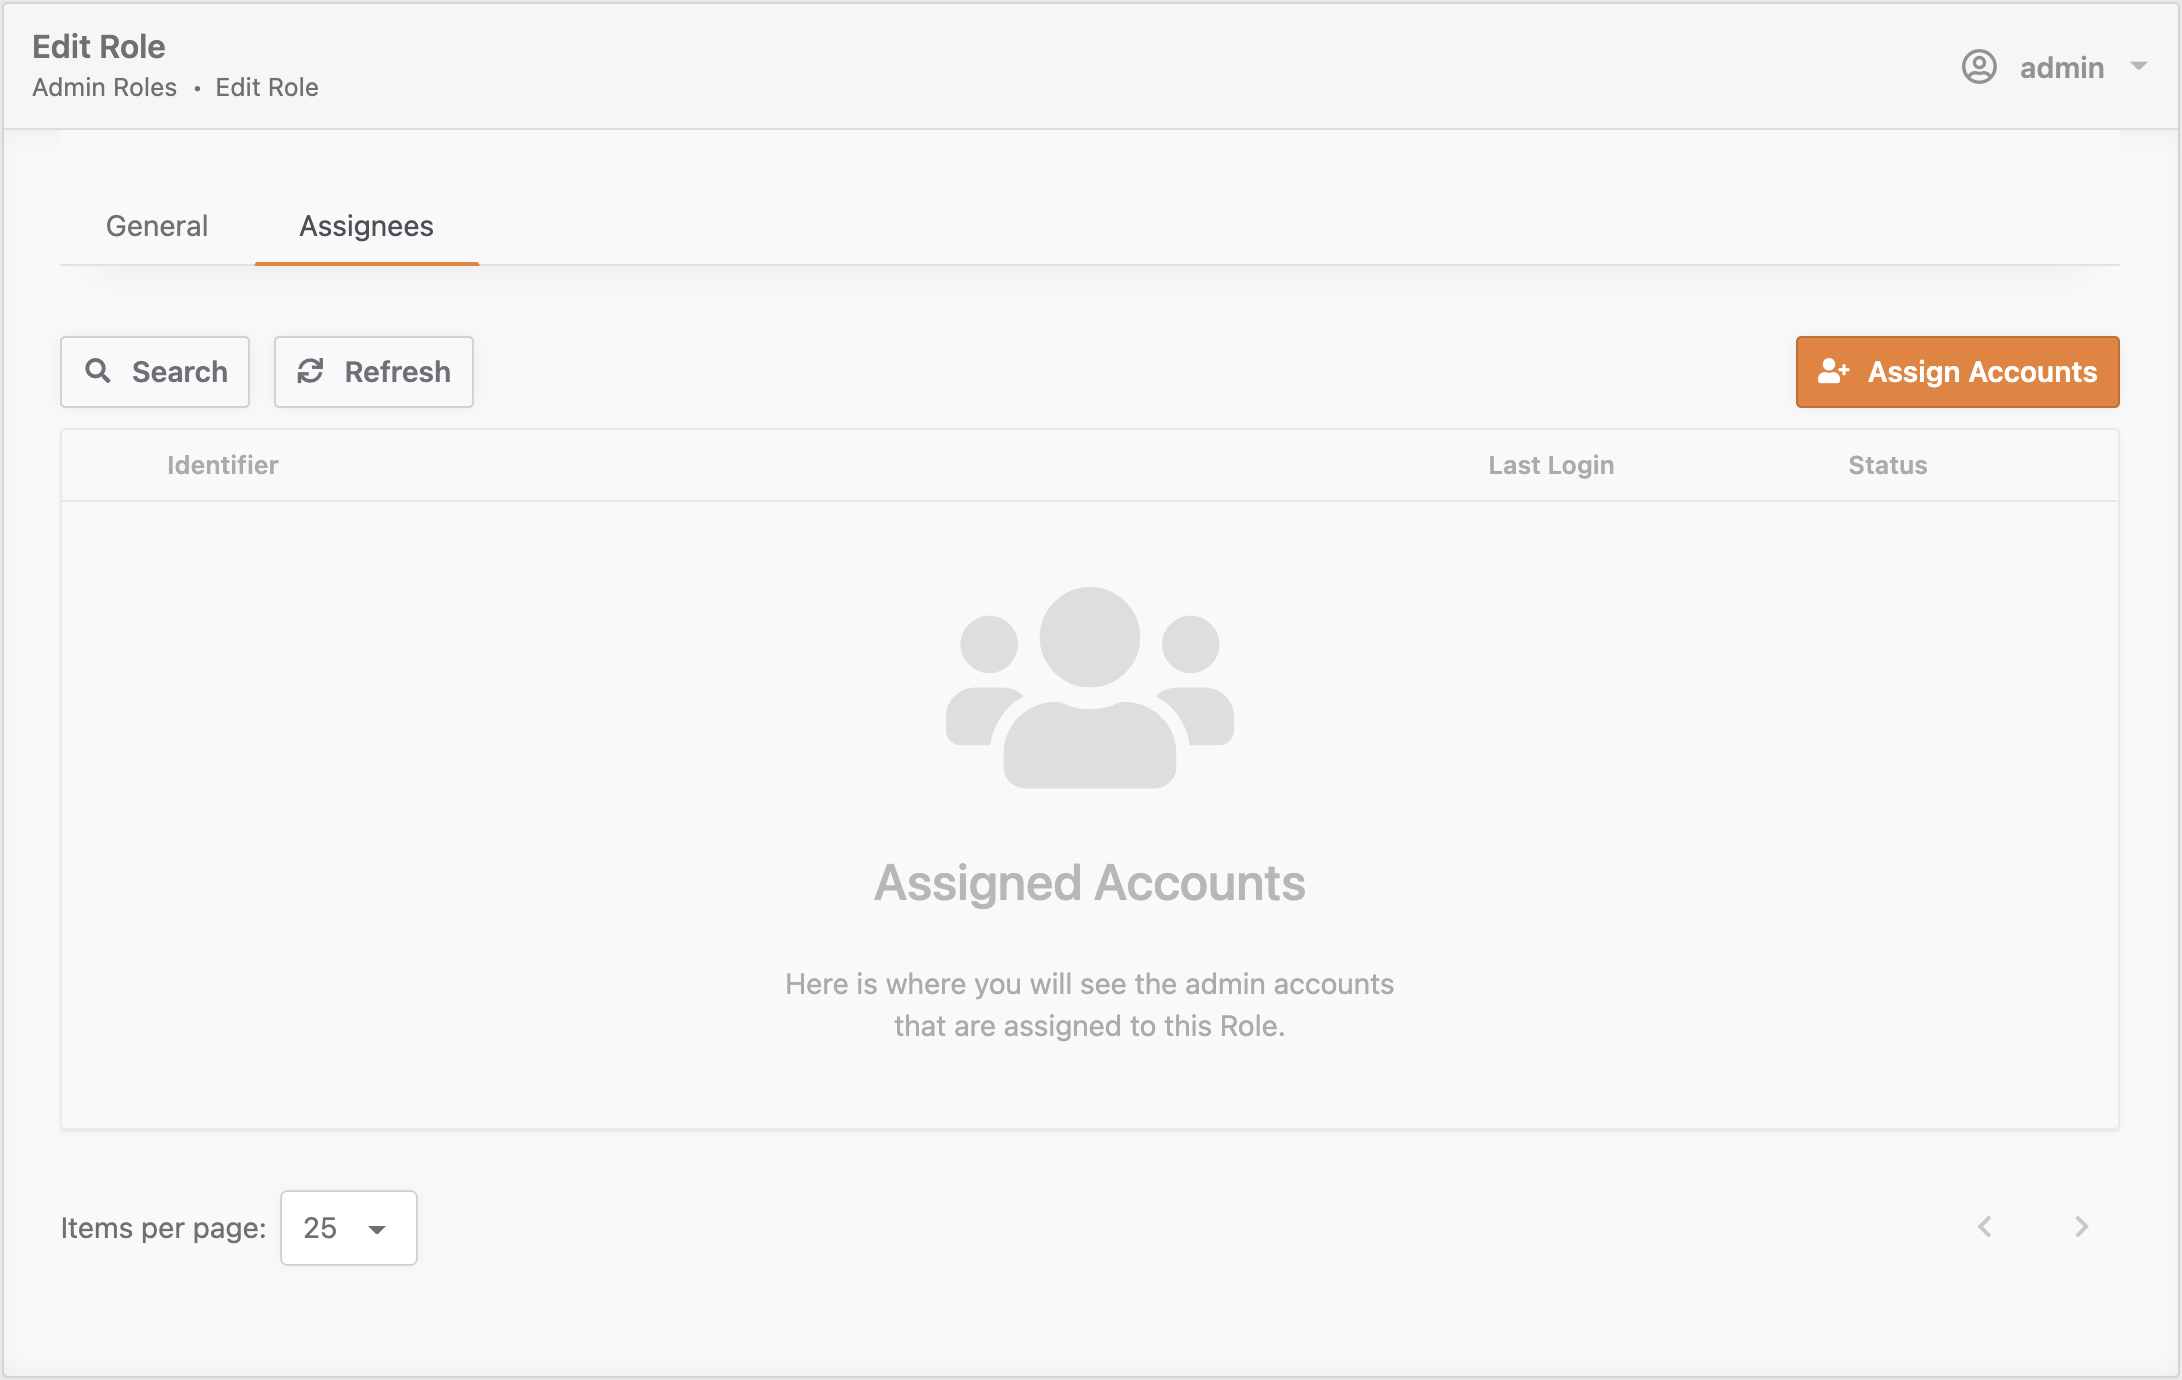 Assignees page